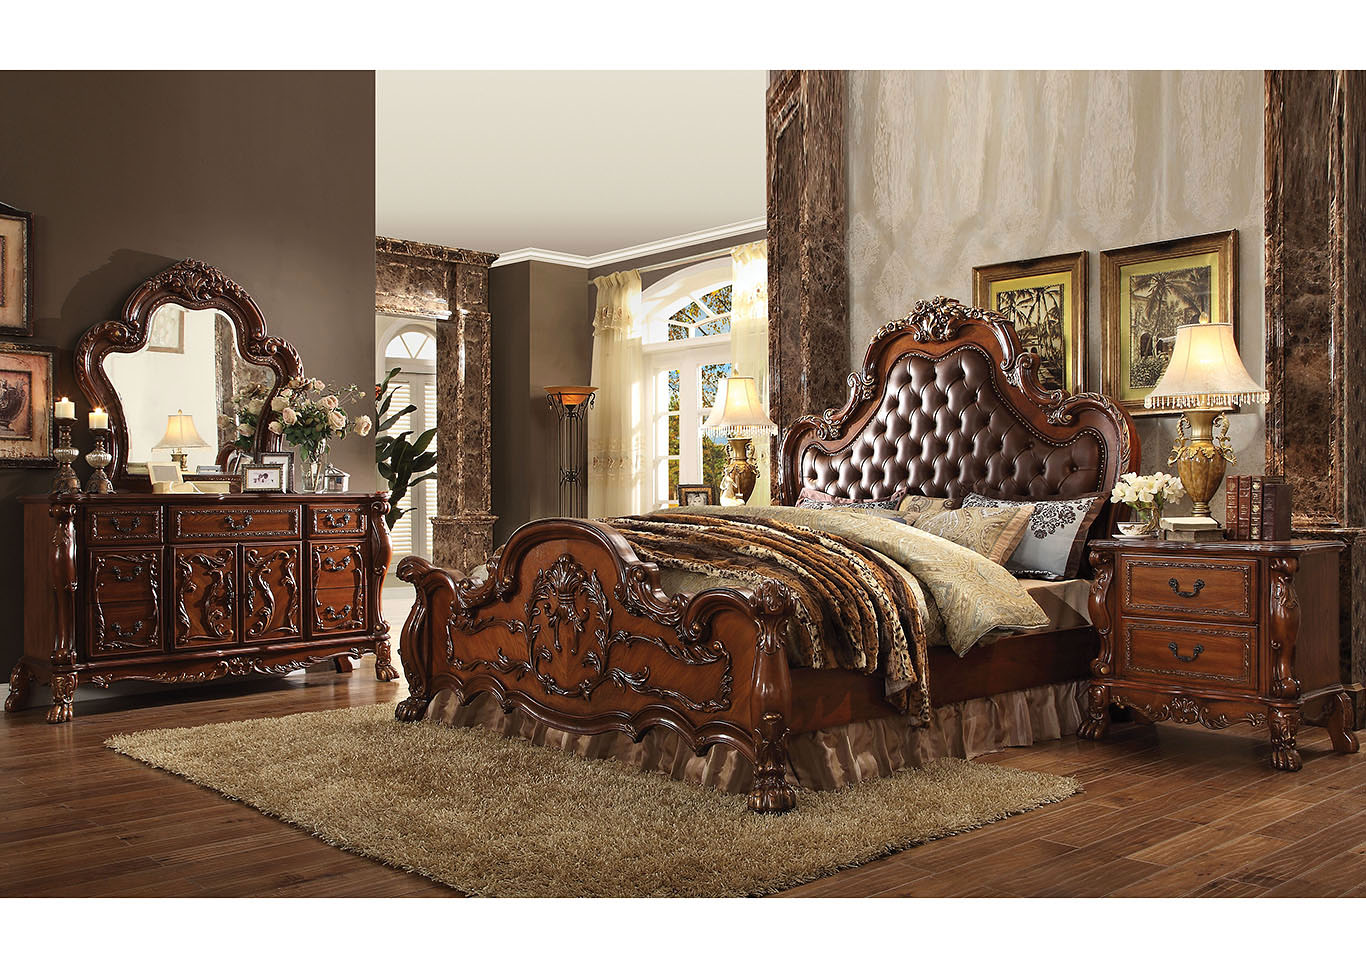 Royal Furniture Gifts Dresden Cherry Oak Queen Upholstered Bed W